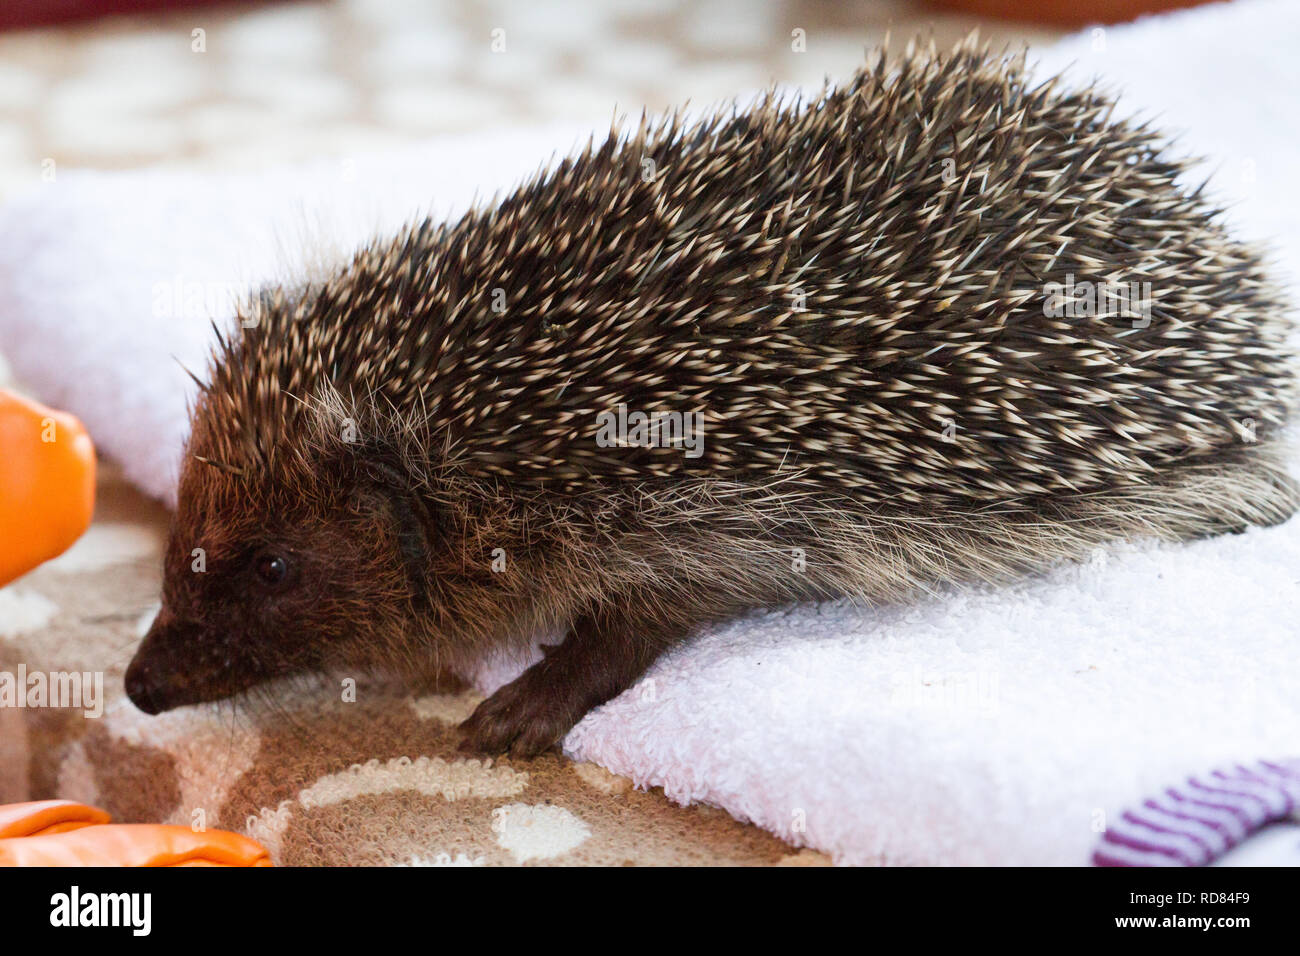 Hedgehog ( Erinaceus europaeus ) , in wildlife hos[pital that cares for ,rehabilitates and releases animals back into the wild . Stock Photo